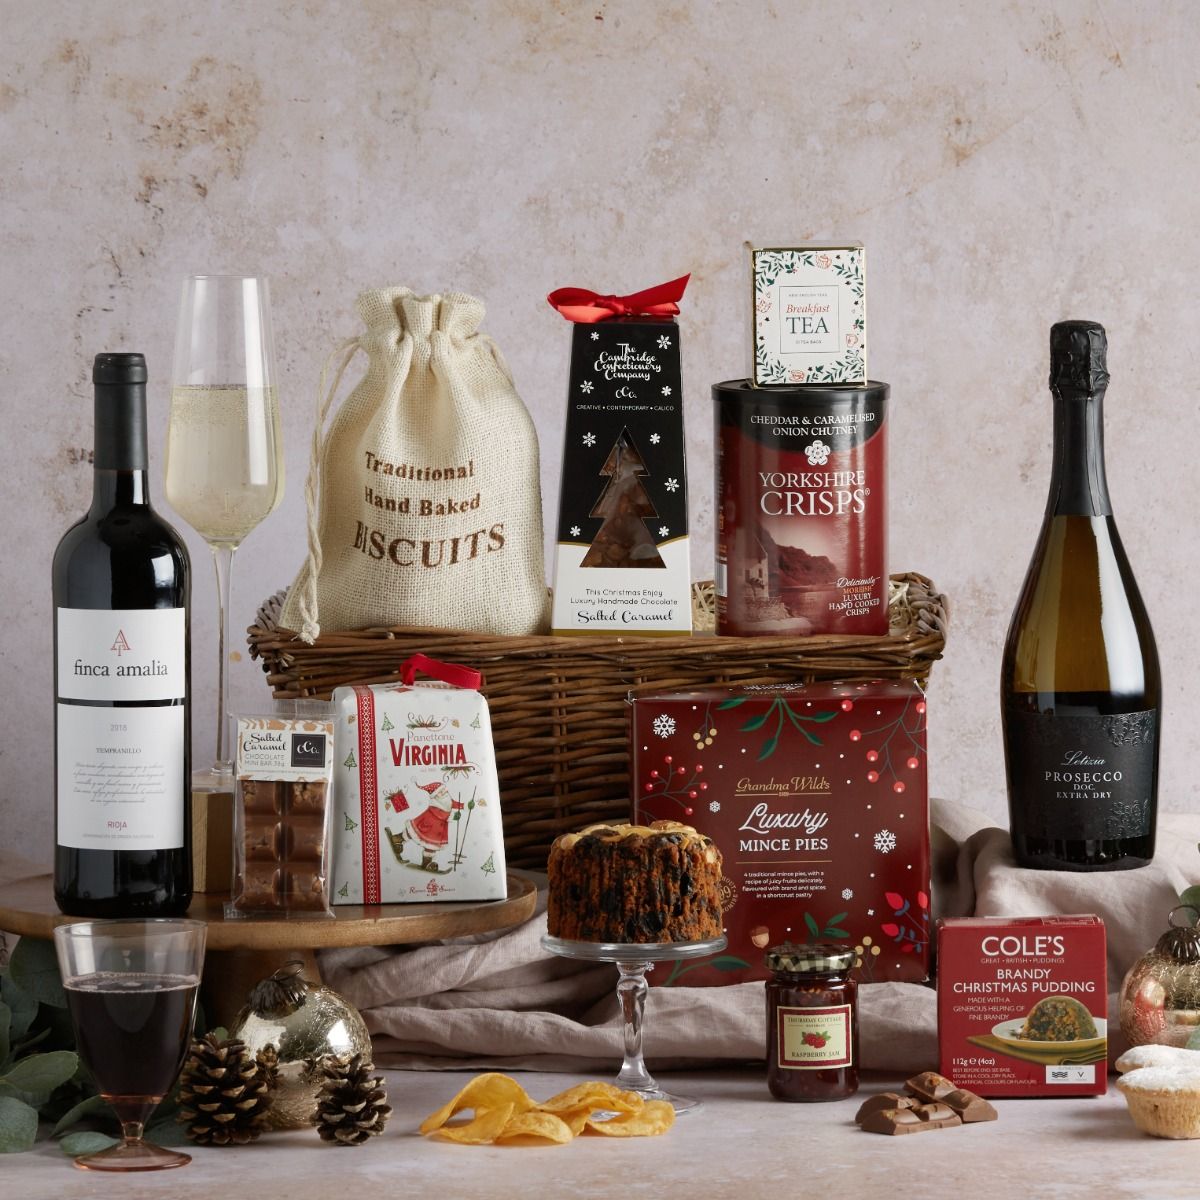 Sleigh Bells Hampers with contents on display, a glass of Prosecco and a wicker basket